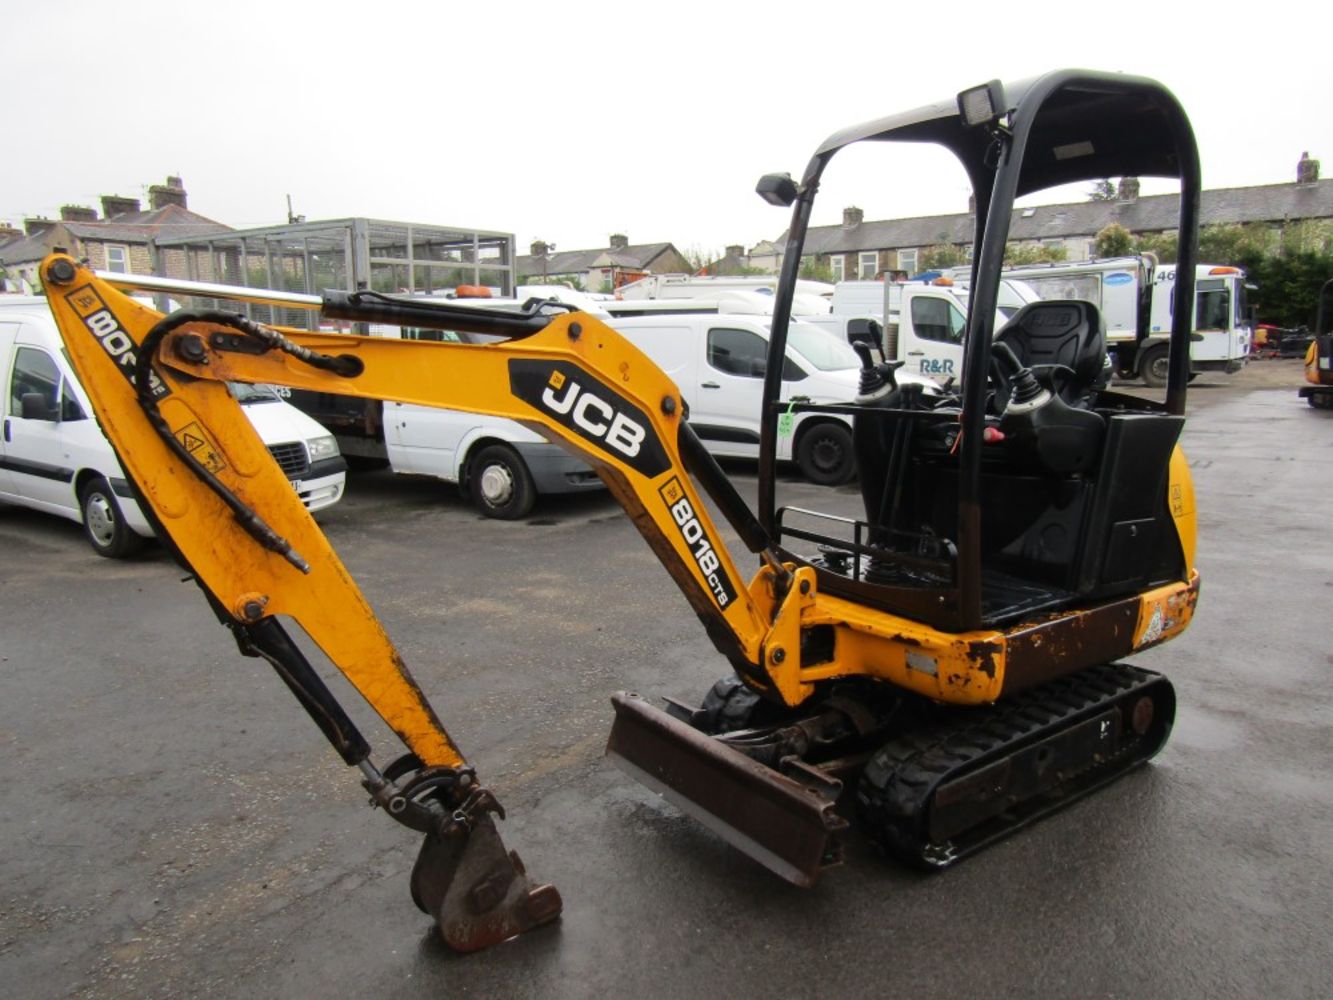 Light Commercial, Car, HGV, Plant, Machinery & Tool Auction, Direct council, Leasing companies, etc